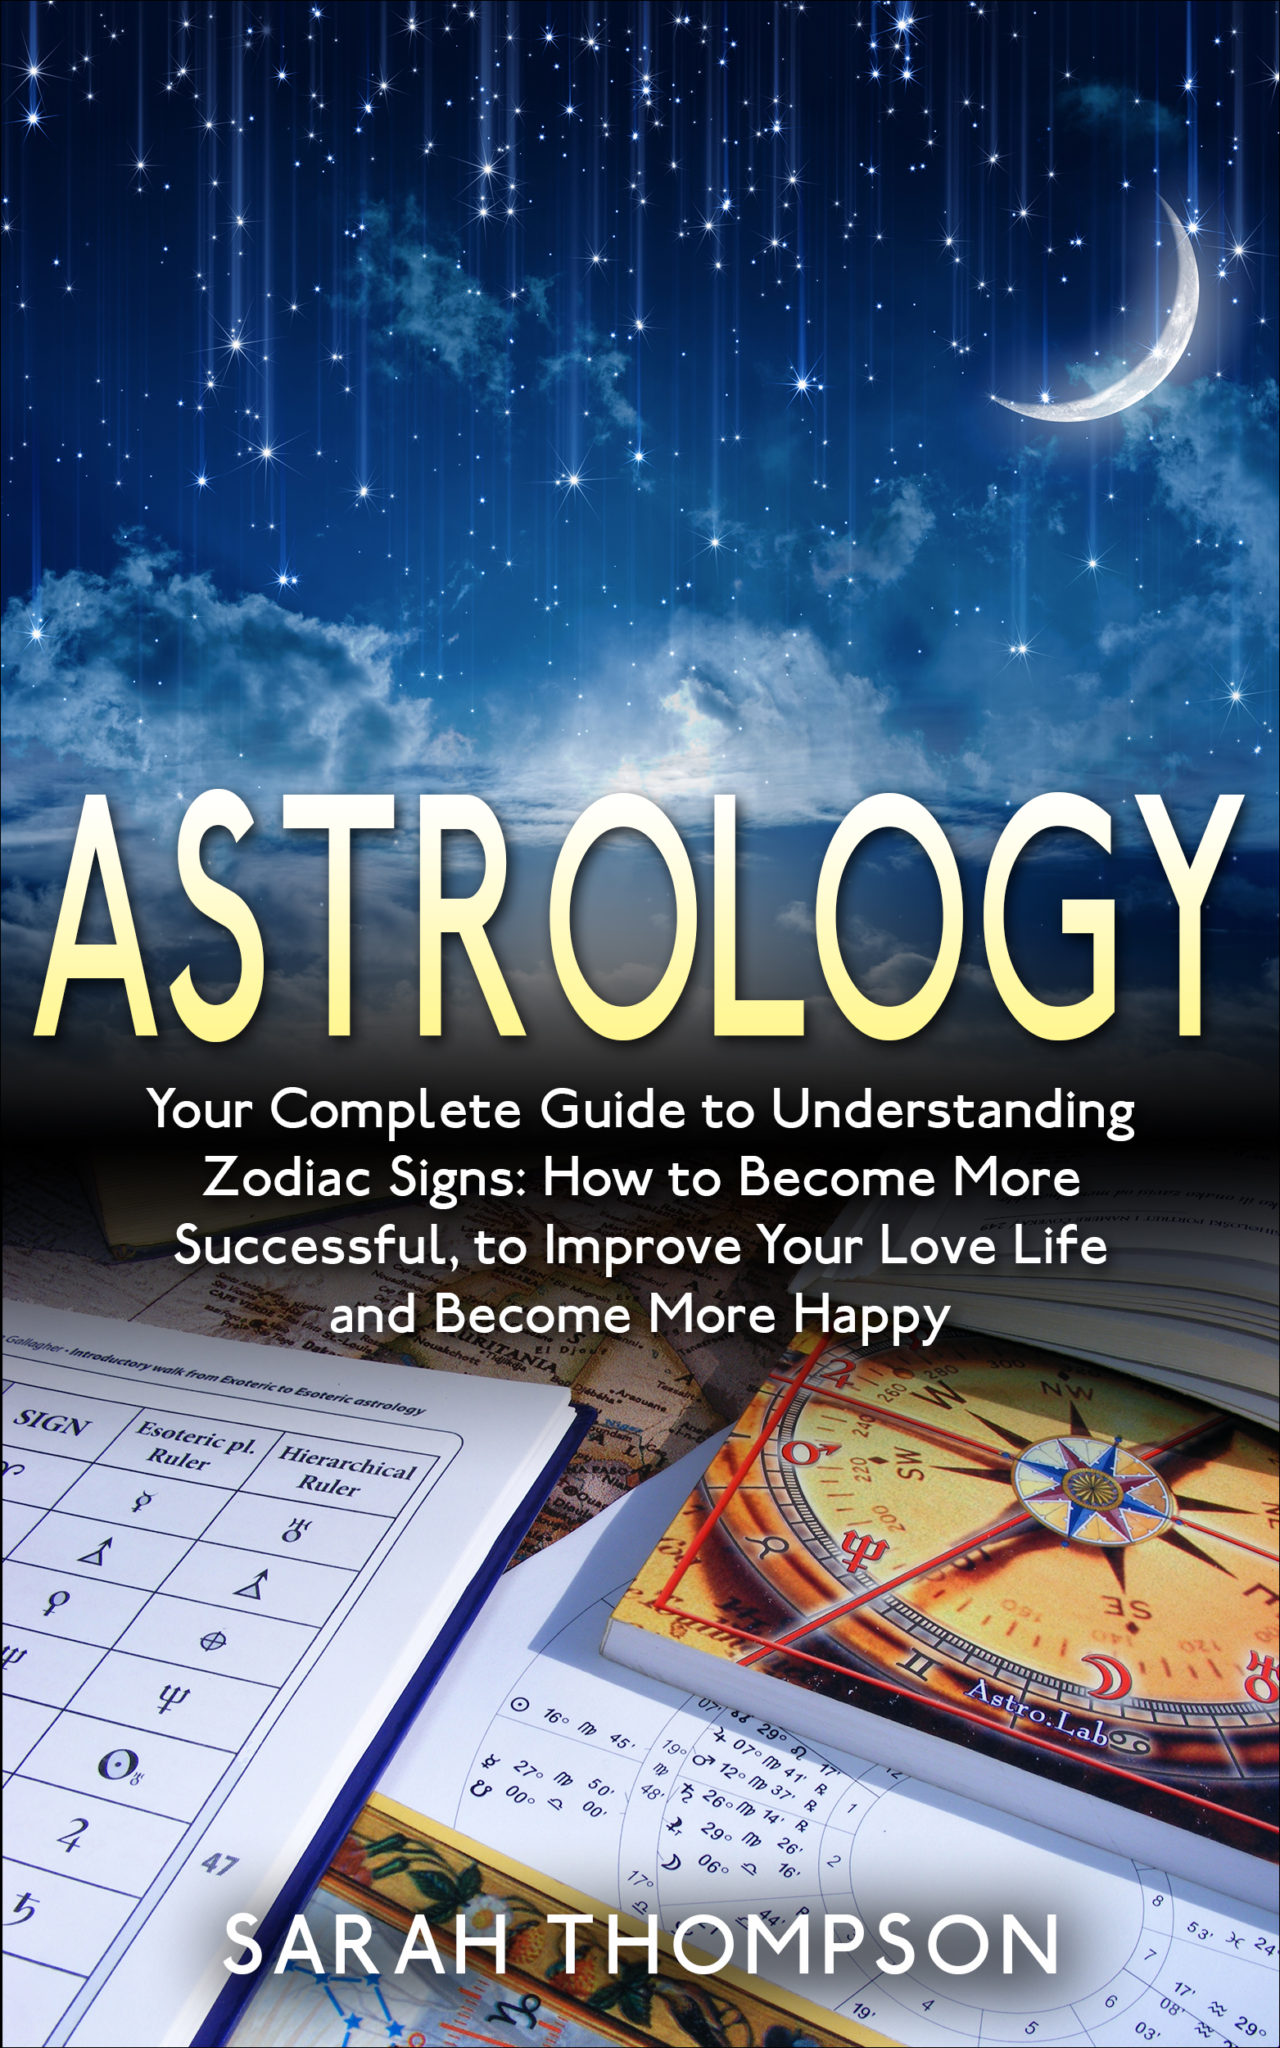 FREE: Astrology: Your Complete Guide to Understanding Zodiac Signs: How to Become More Successful, to Improve Your Love Life and Become Happier by Sarah Thompson